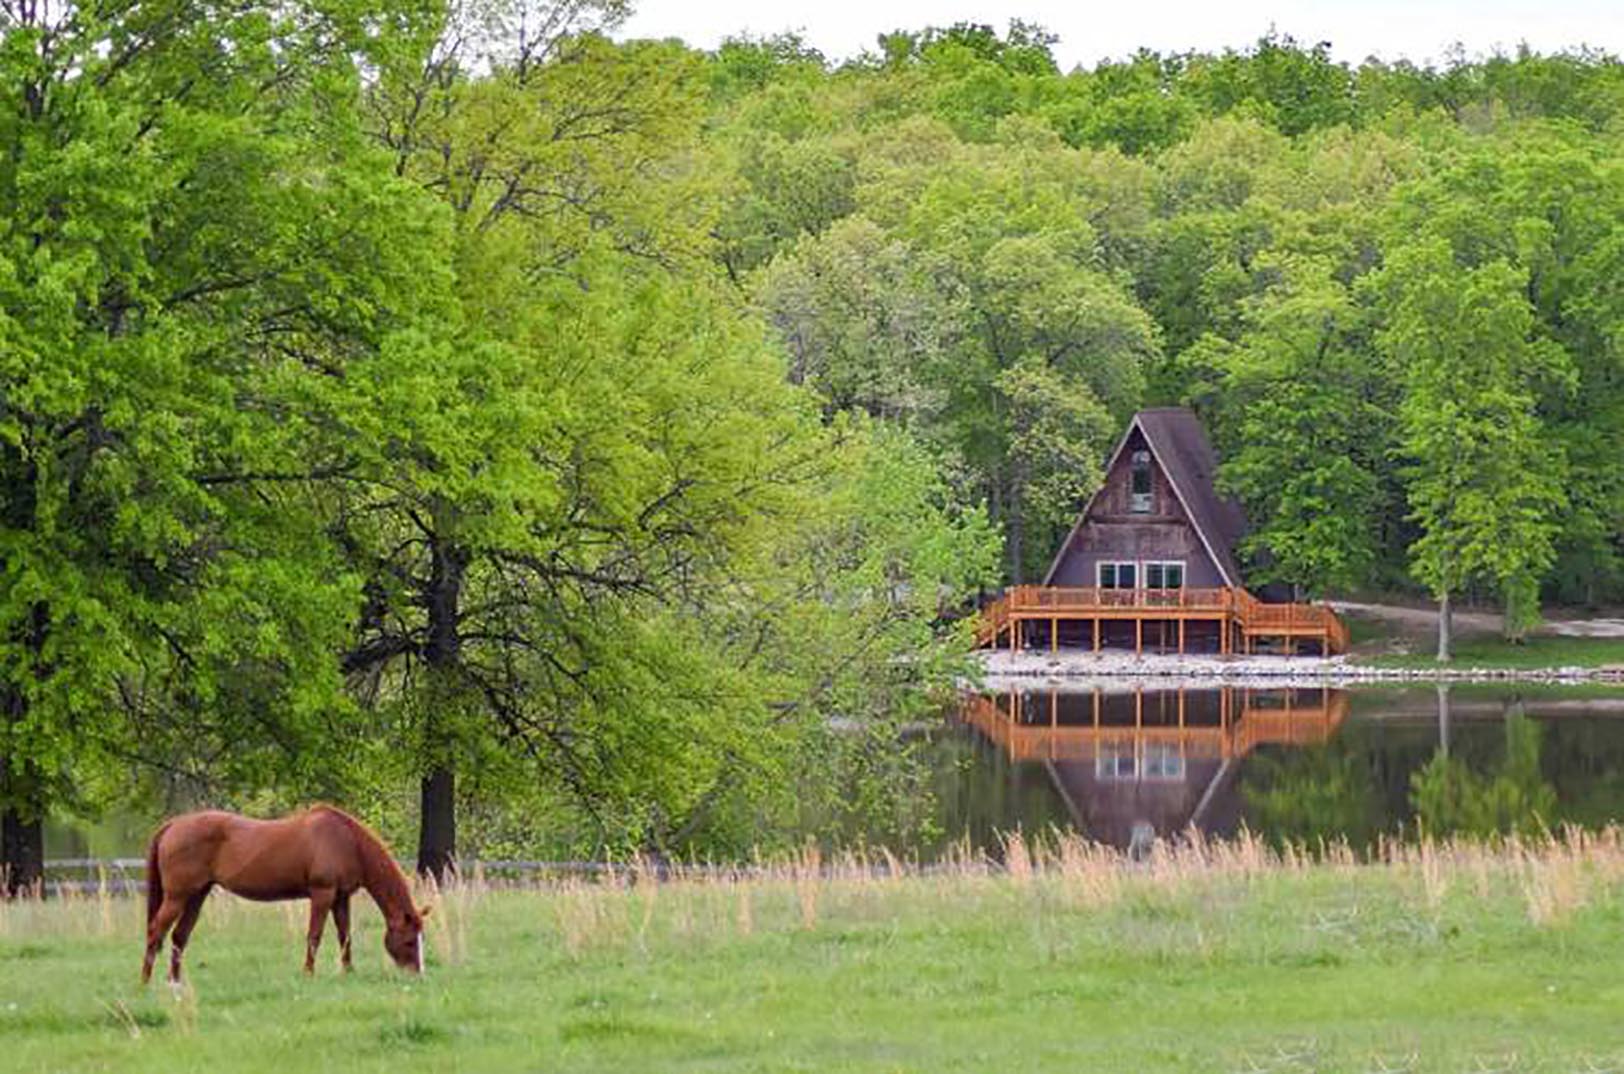 PondDay — the KC-cast ‘Airbnb for private ponds and lakes’ — drops its first lure in Missouri